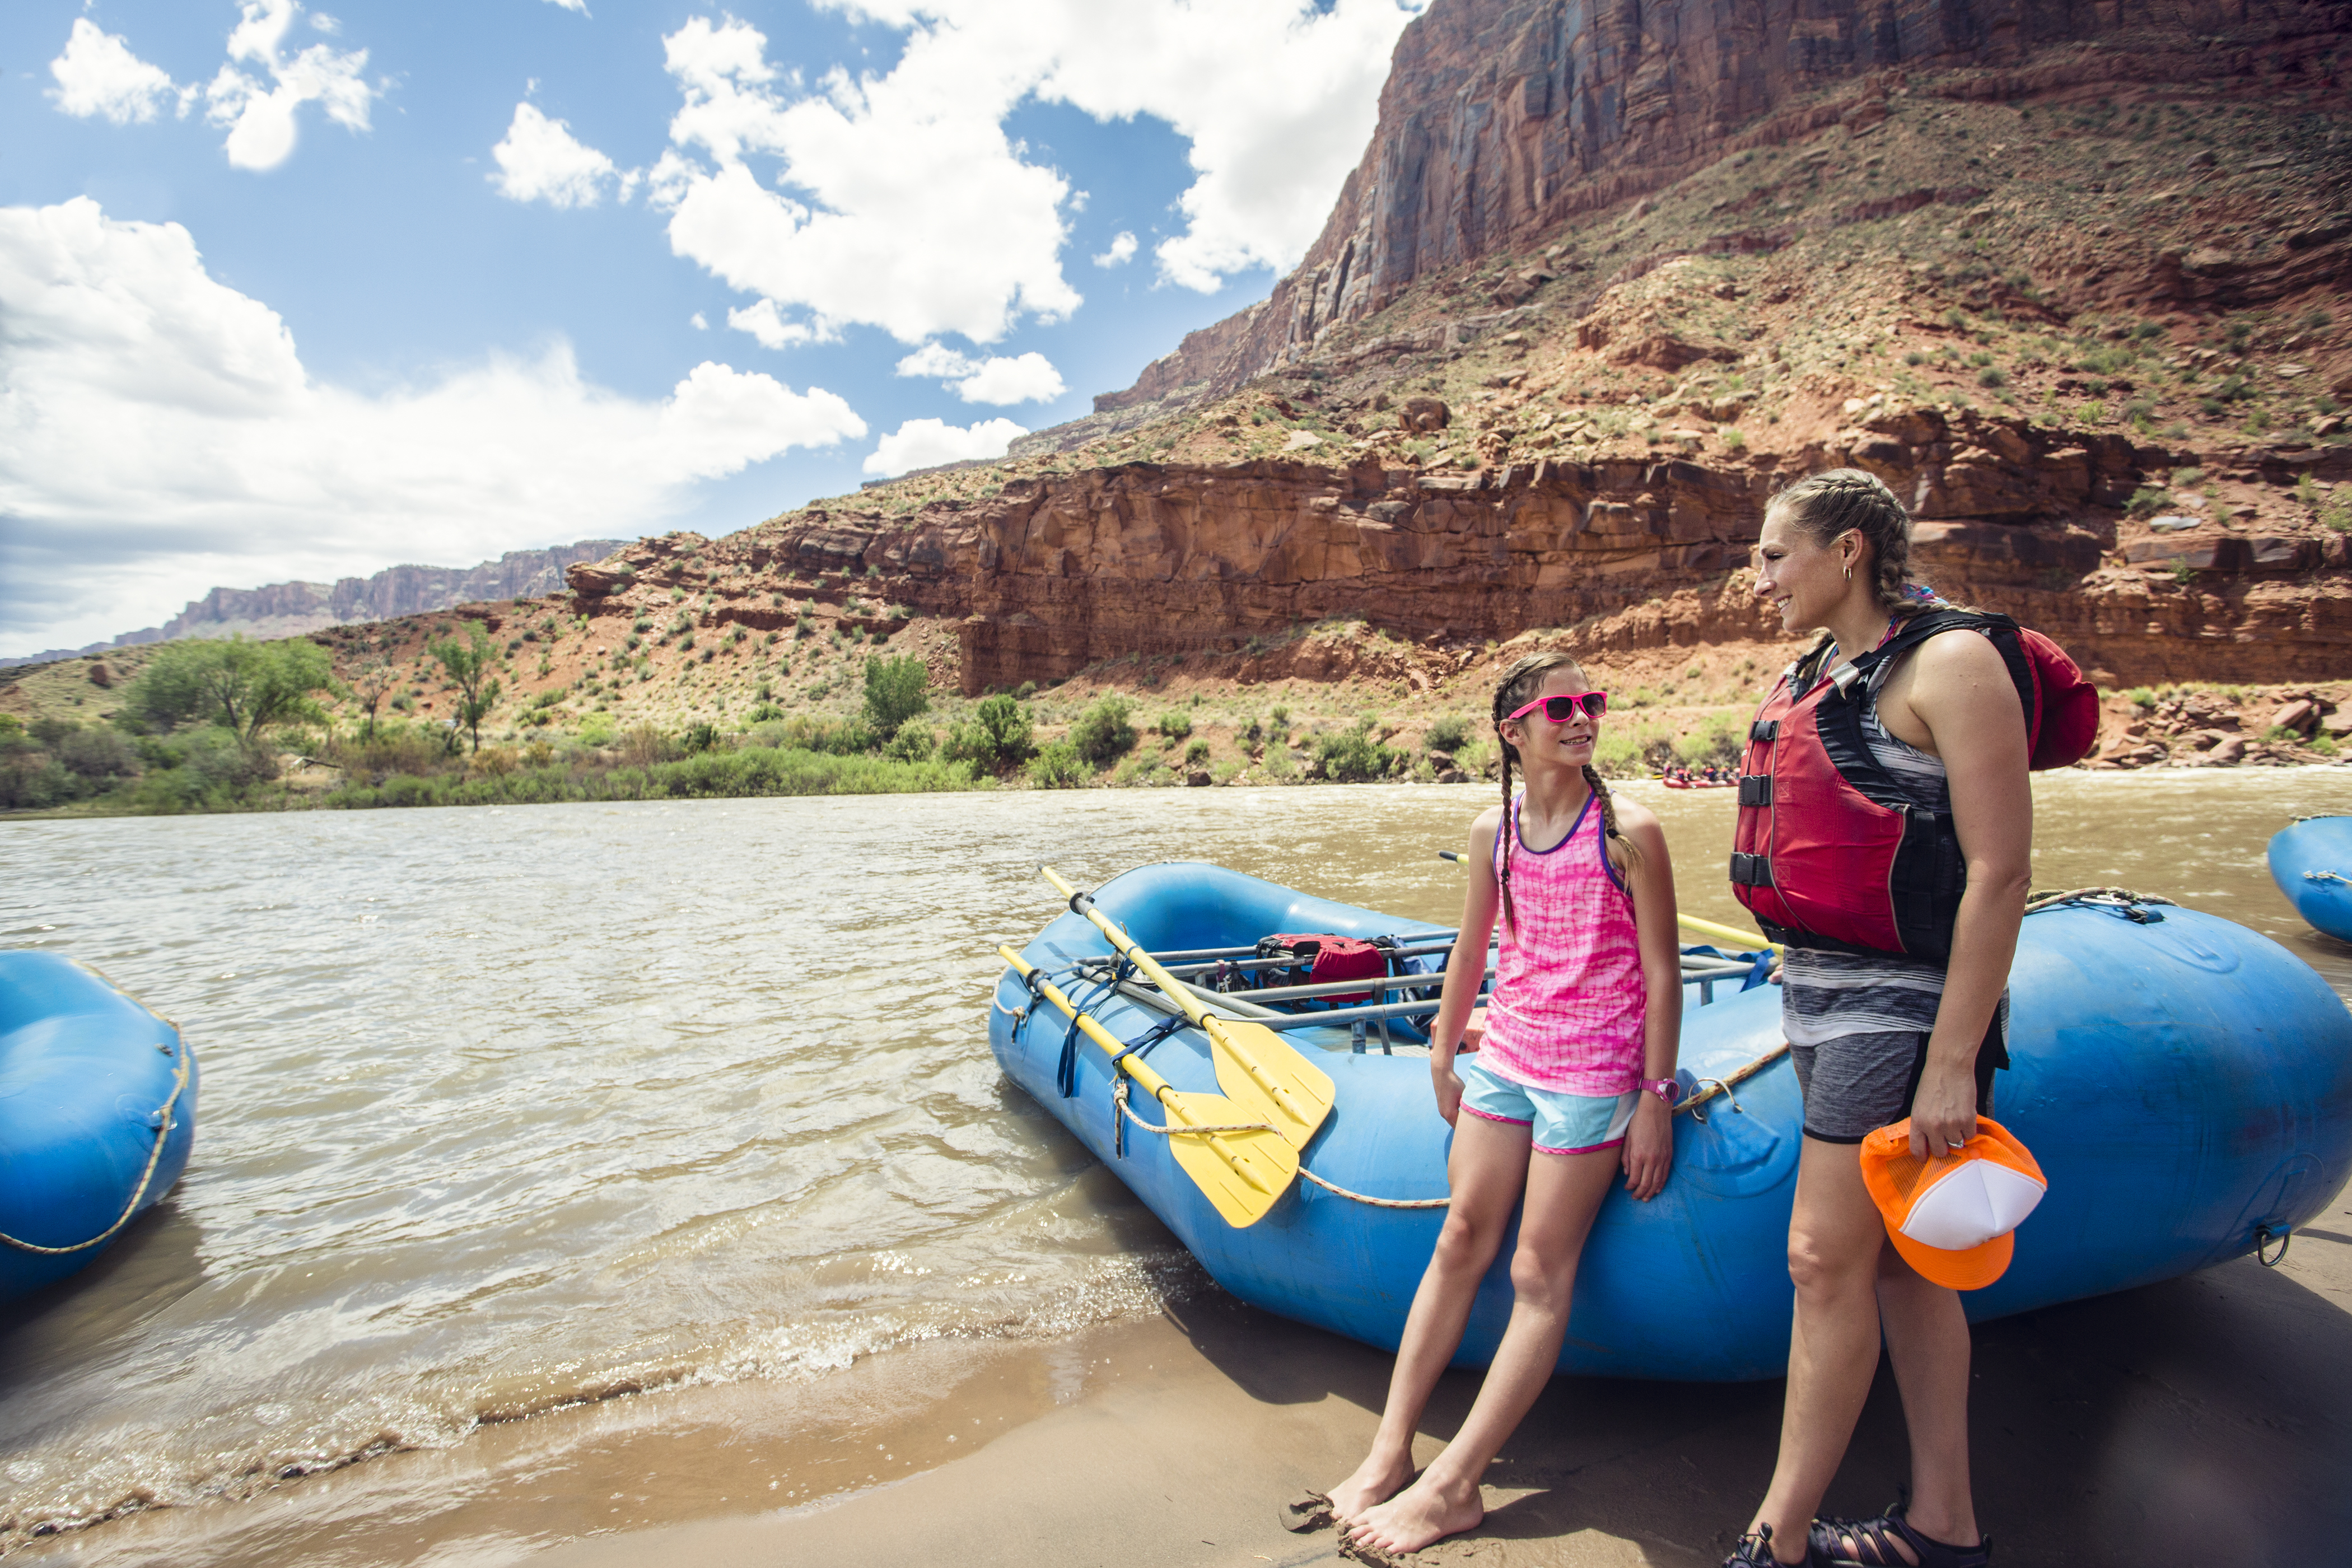 A woman and a young girl standing near the Colorado River | Source: Shutterstock